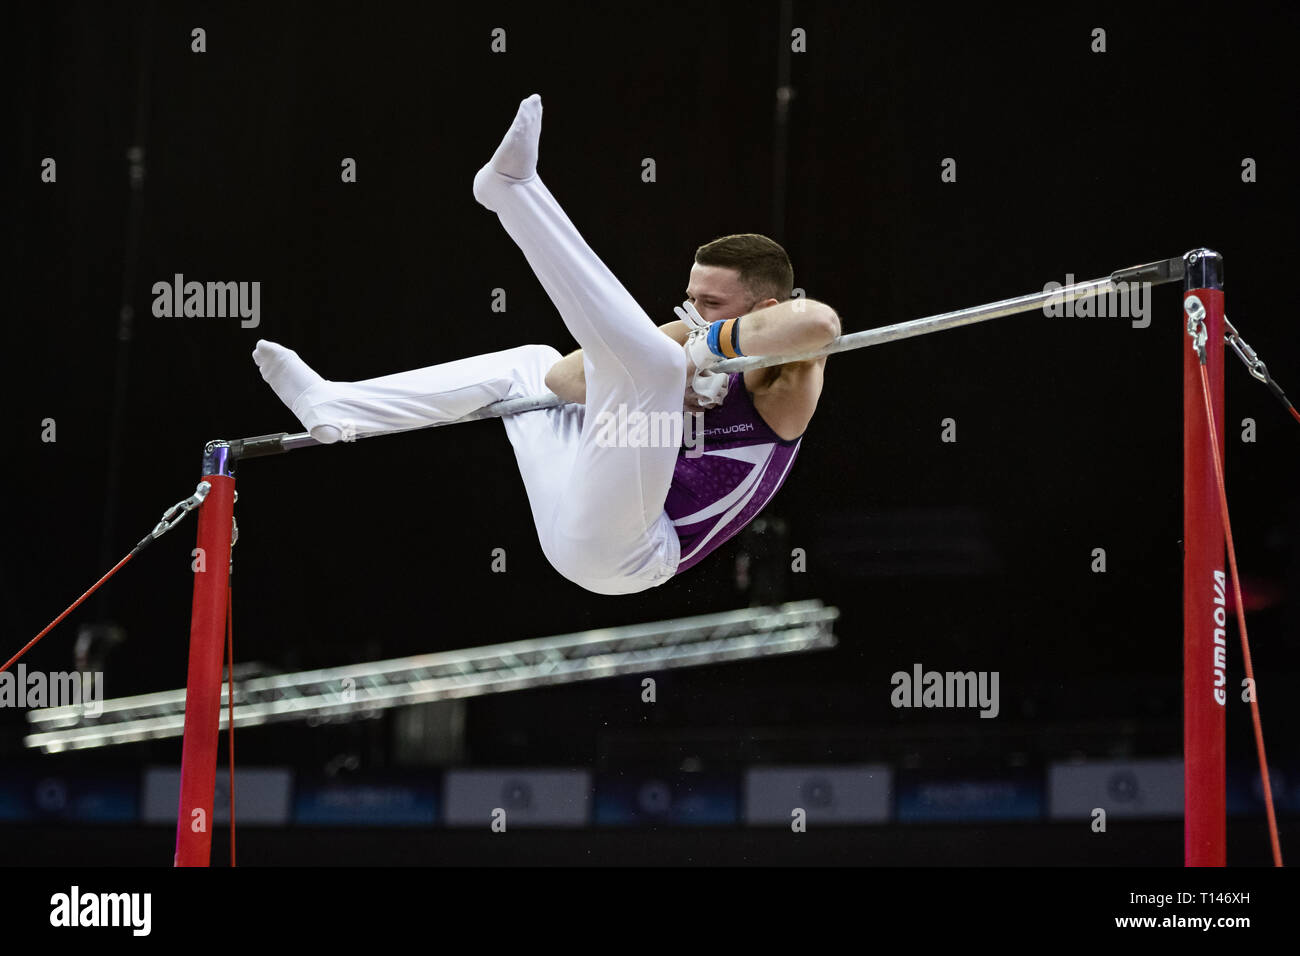 London, UK. 23rd March, 2019. Don Cunningham performs High Bar during the Matchroom Multisport presents the 2019 Superstars of Gymnastics at The O2 Arena on Saturday, 23 March 2019. LONDON ENGLAND. Credit: Taka G Wu/Alamy News Stock Photo